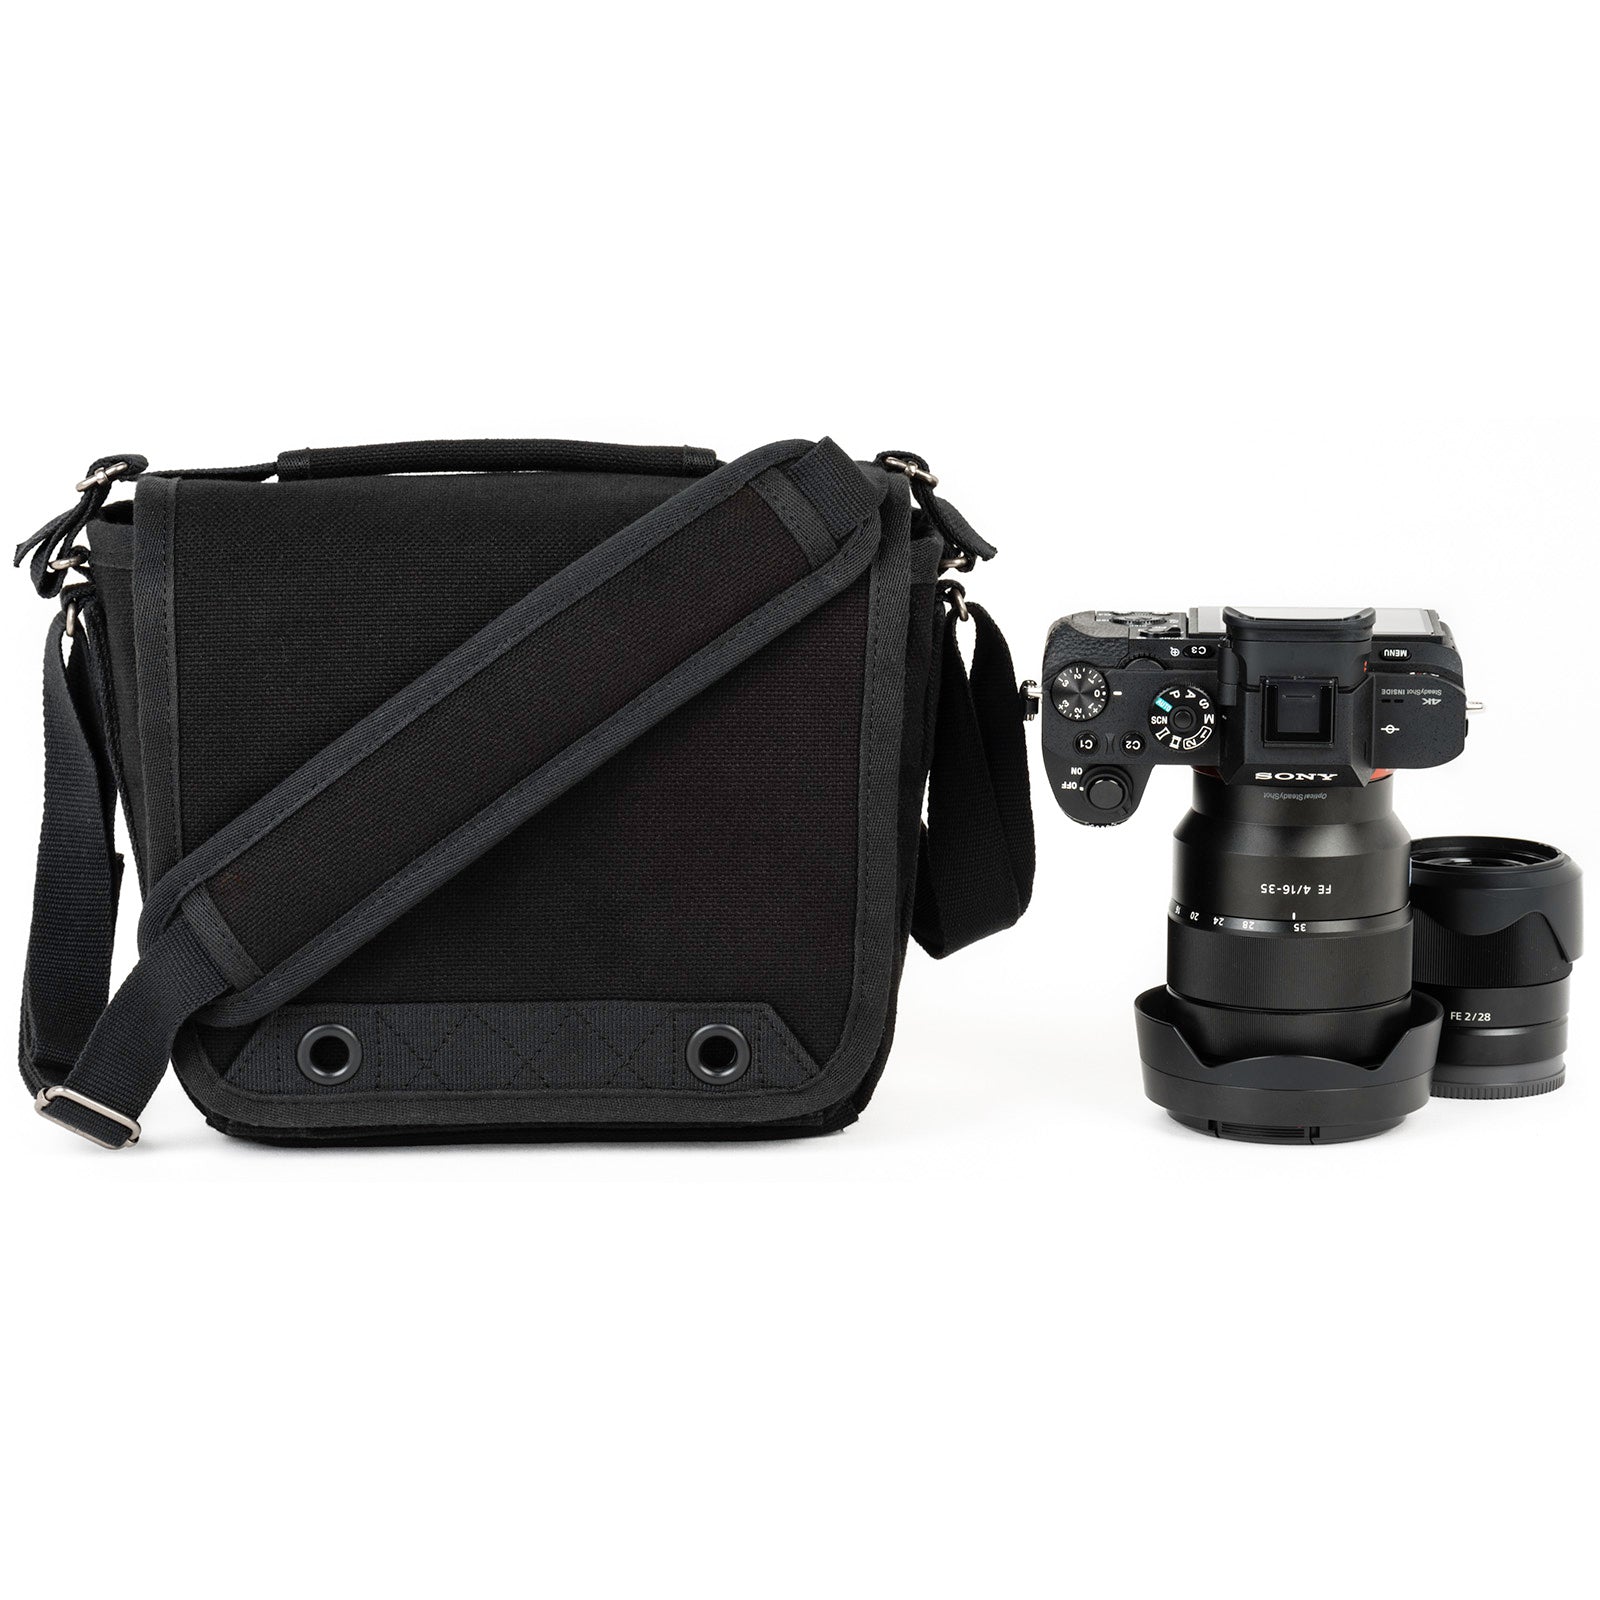 Camera Bag, Fit's Most Digital Cameras, Padded With Belt Loop Made In USA.